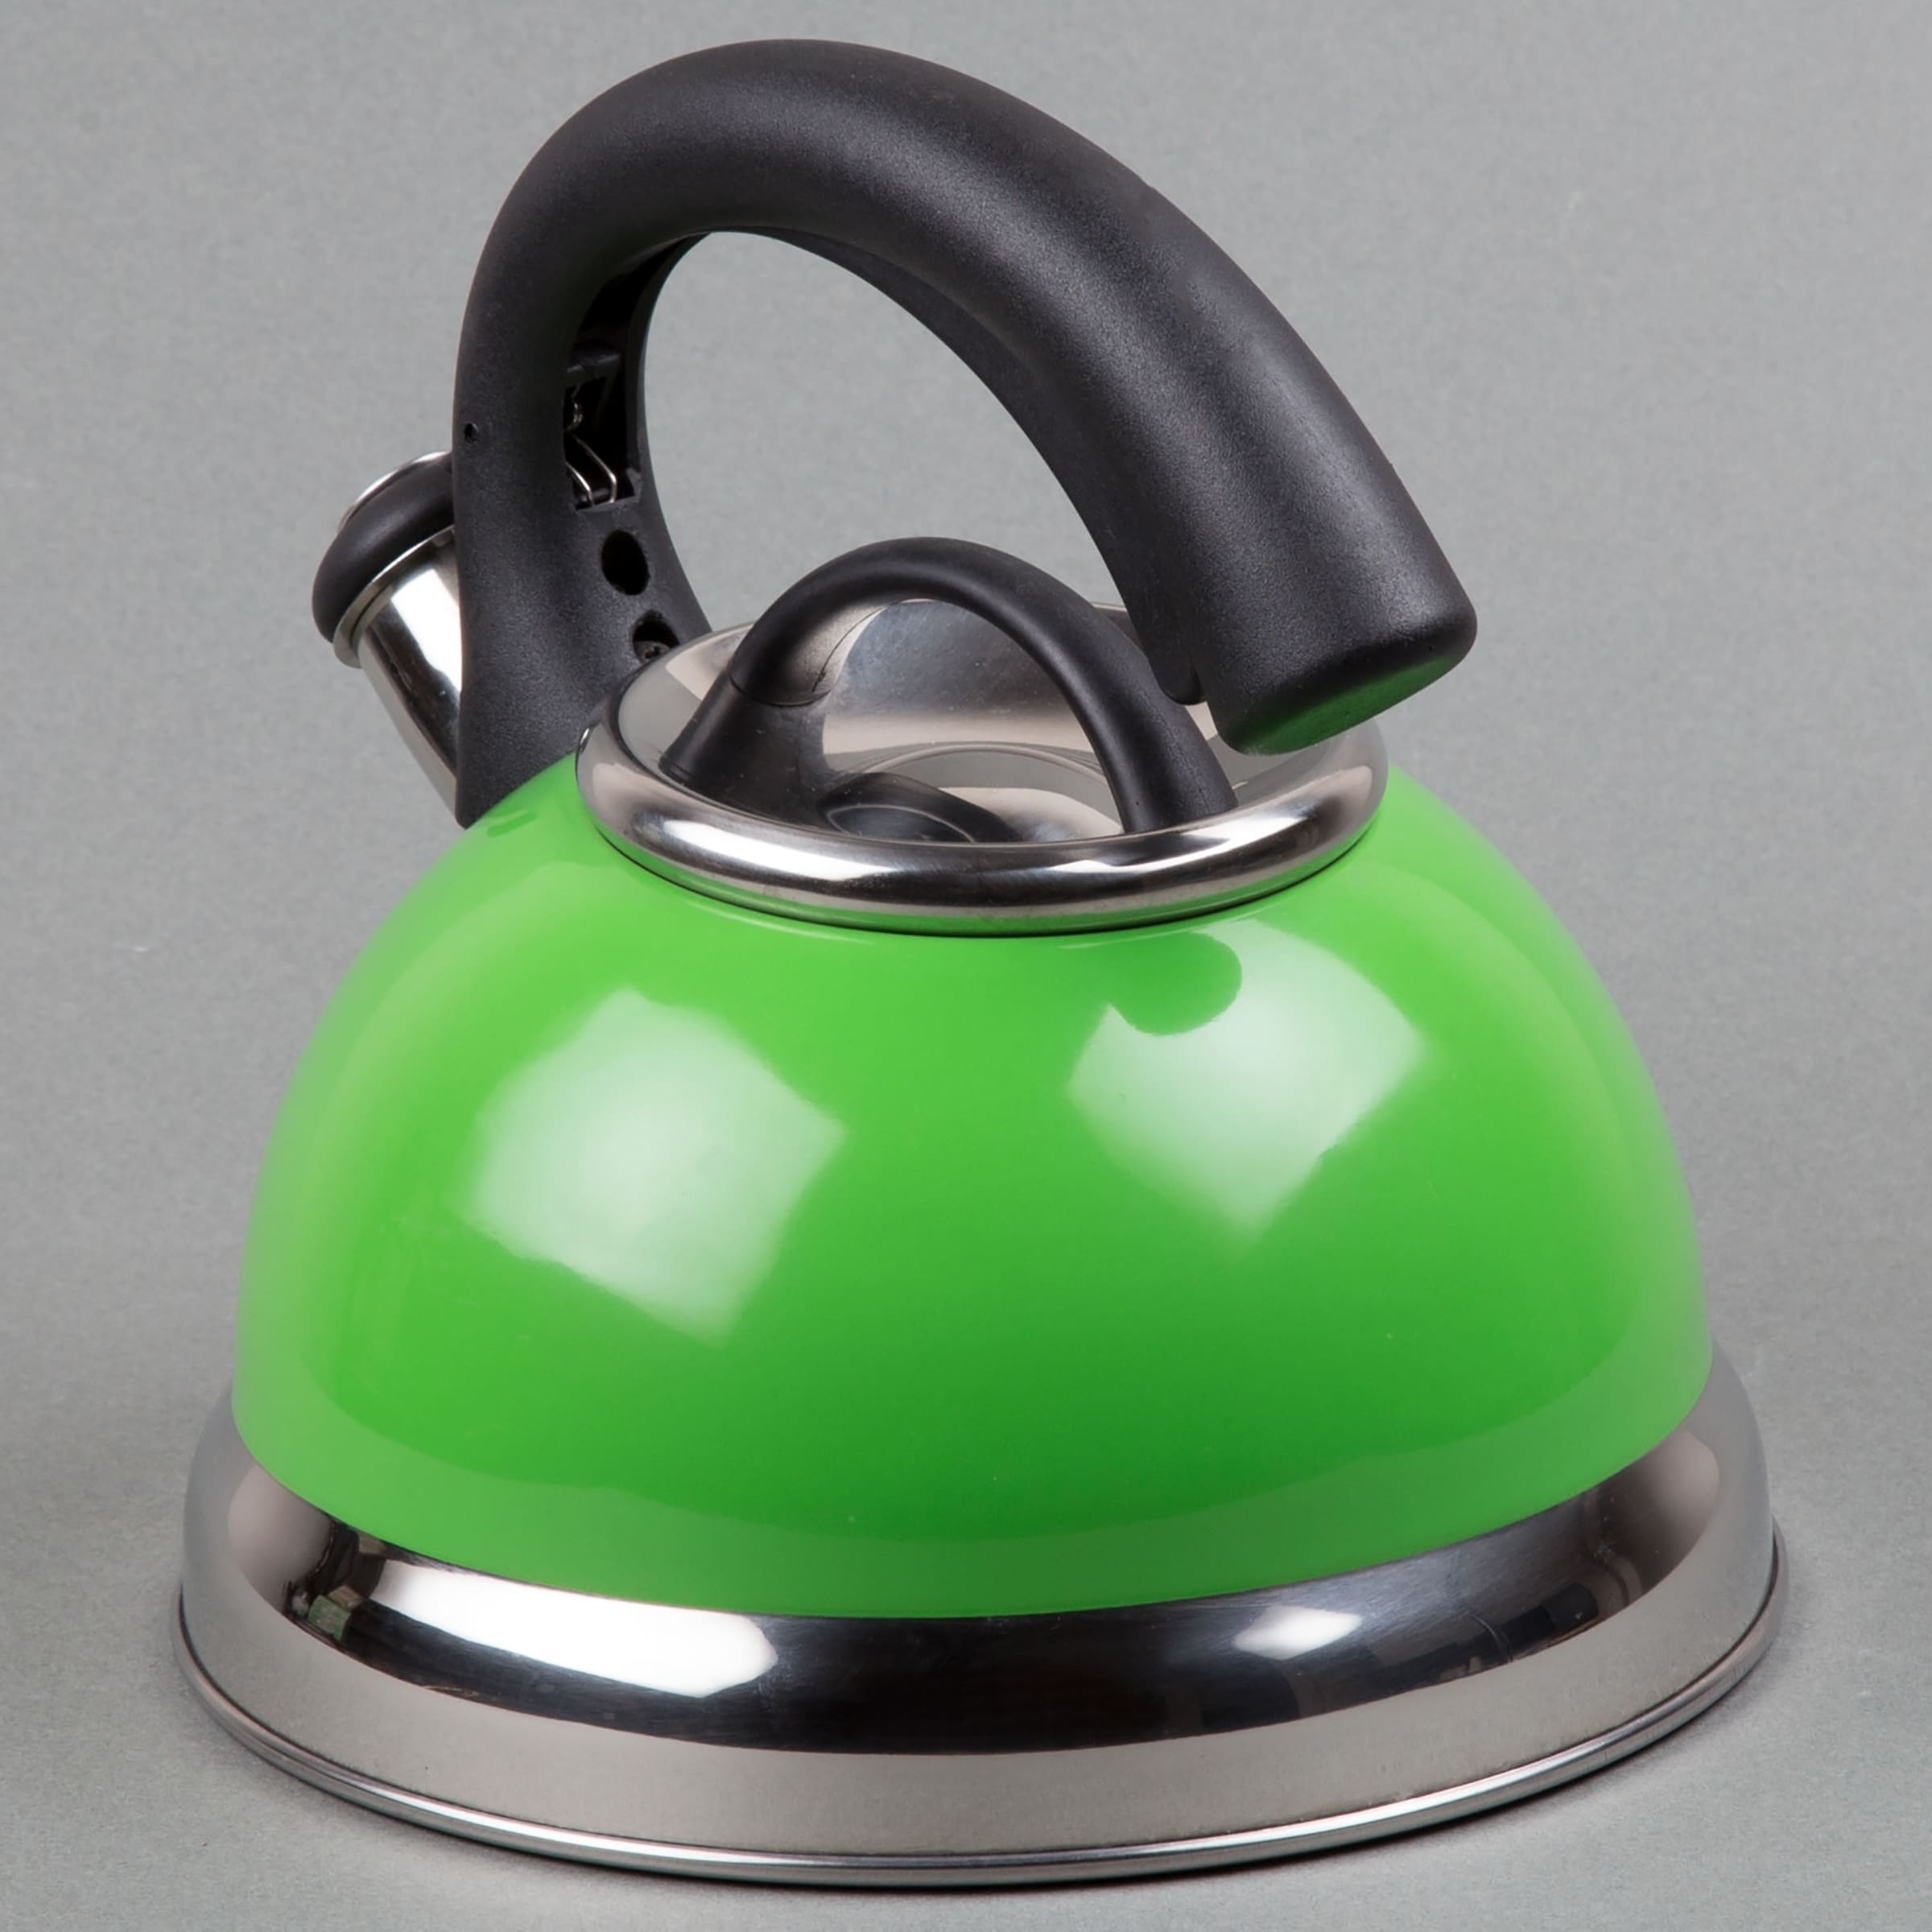 https://ak1.ostkcdn.com/images/products/10666399/Creative-Home-Symphony-2.6-Qt-Whistling-Stainless-Steel-Tea-Kettle-Green-7e368dca-7e74-4d01-a84c-43a8b82d6172.jpg